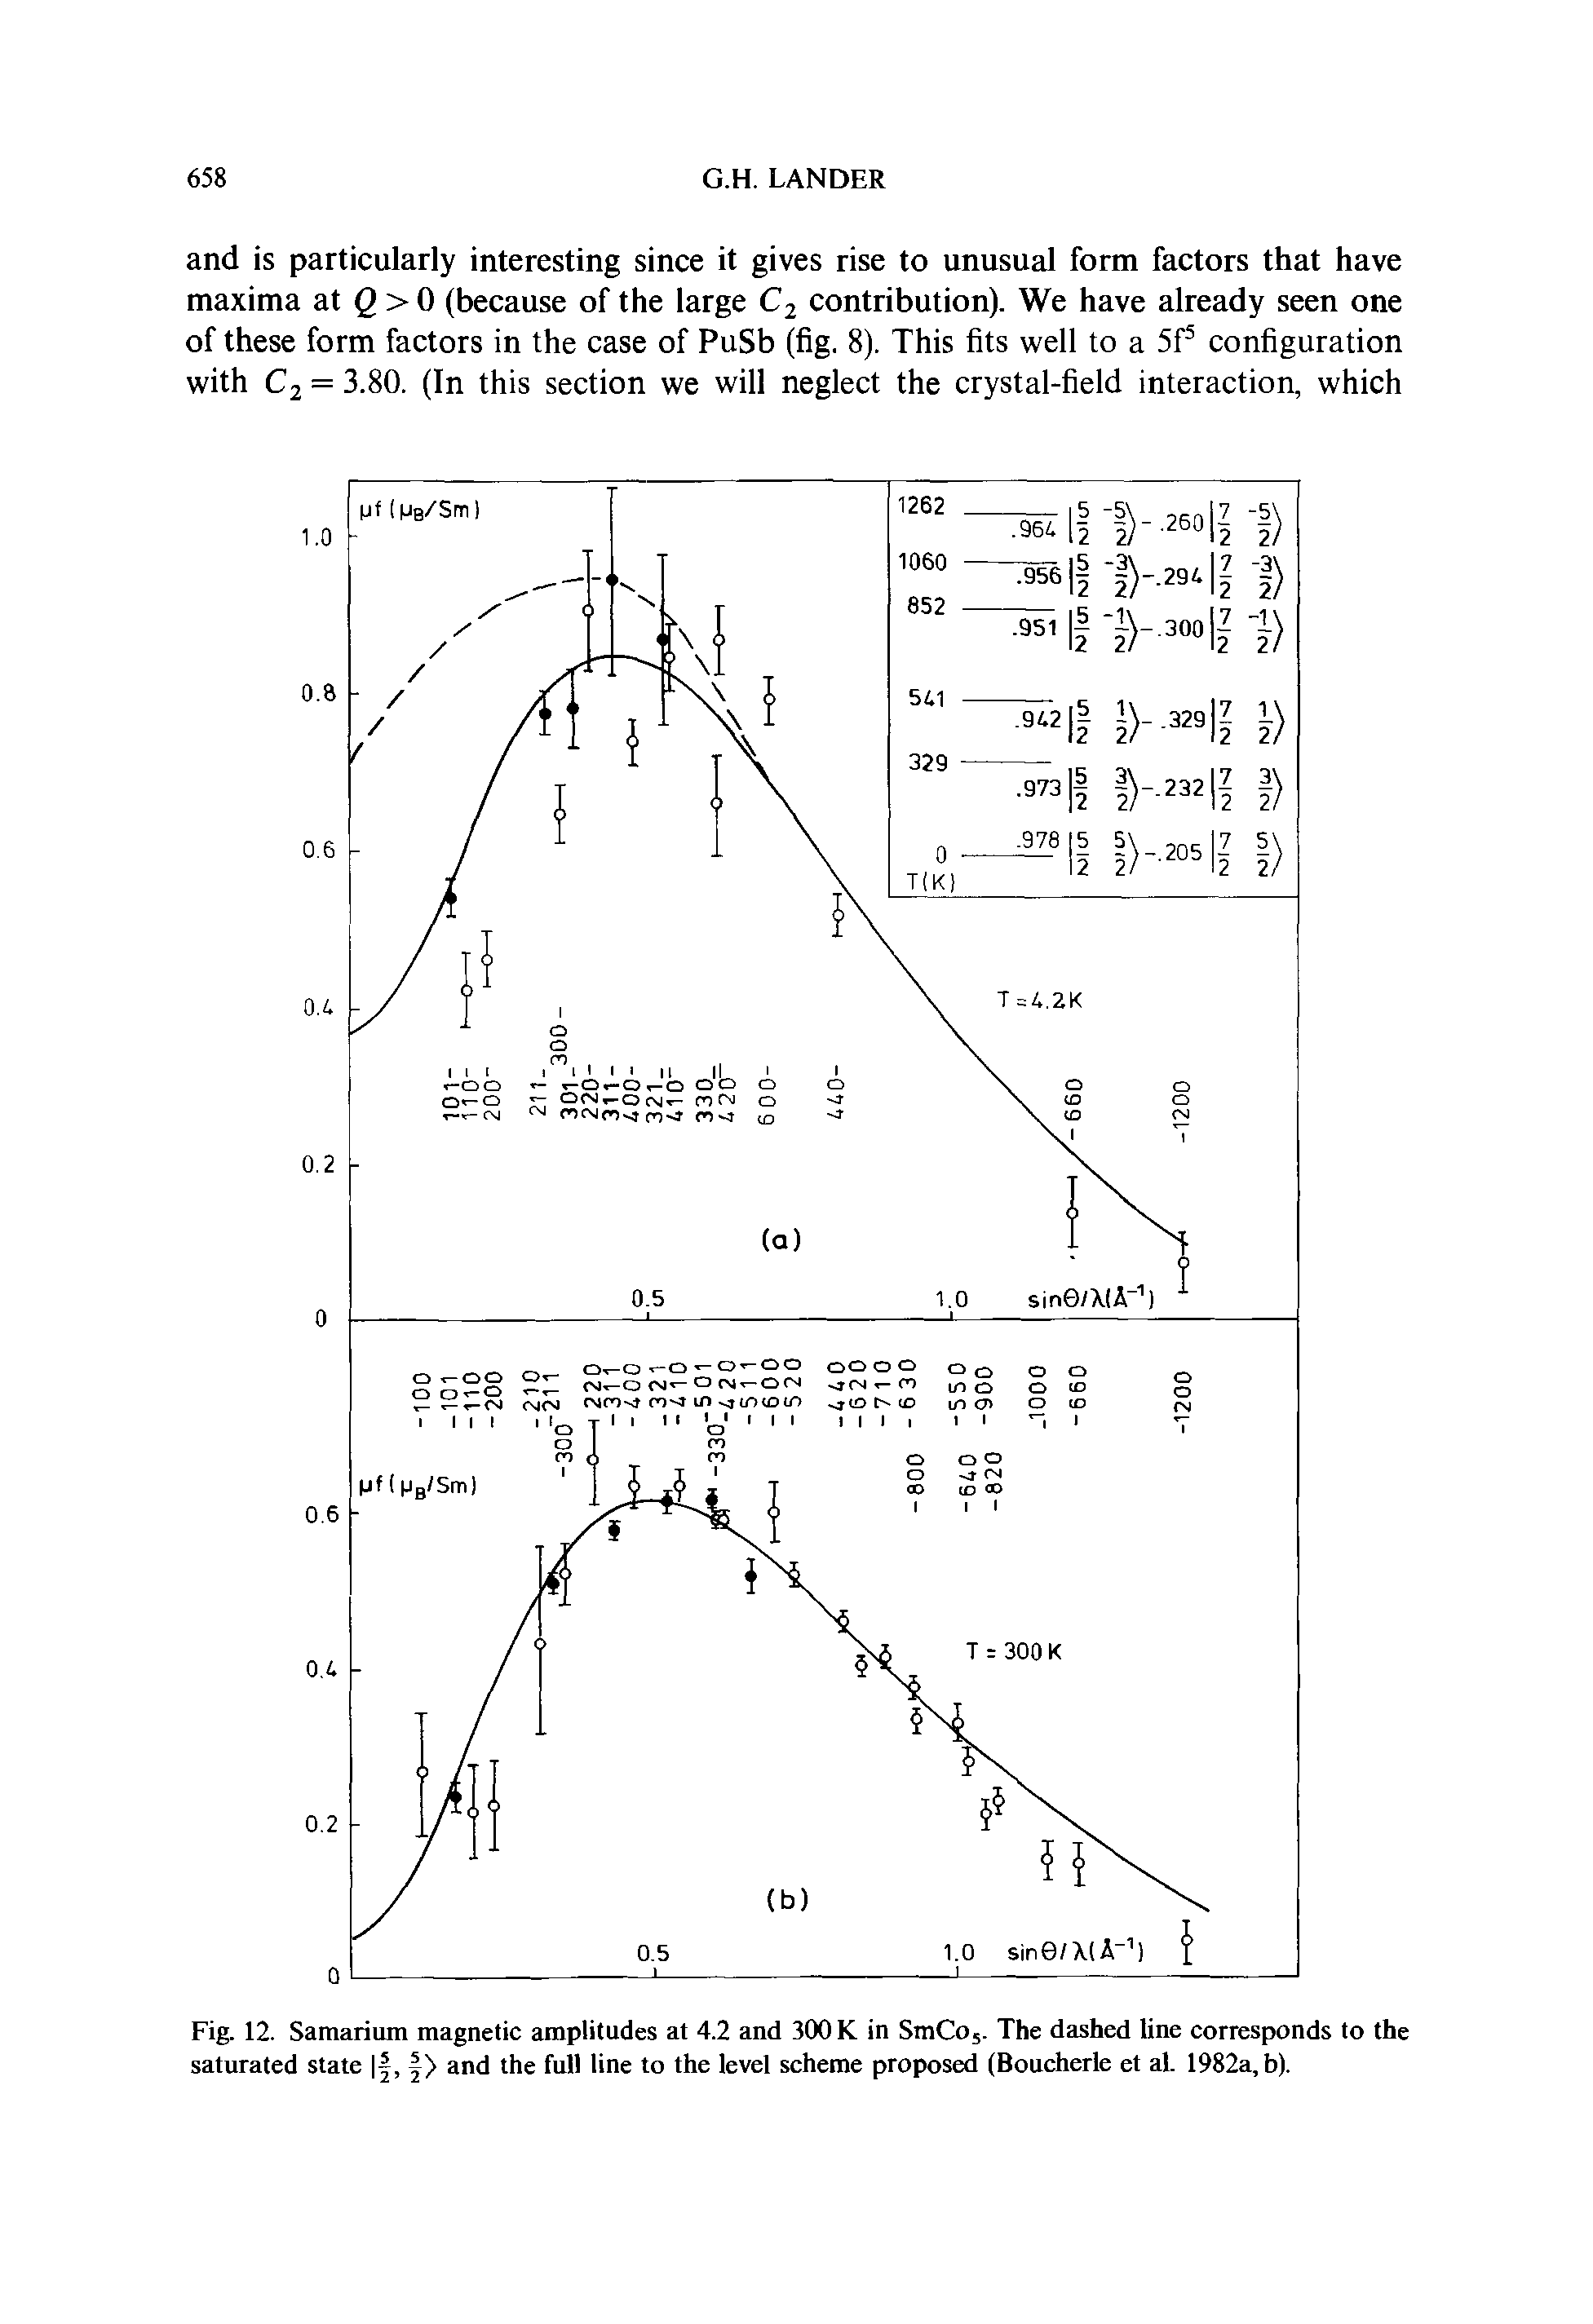 Fig. 12. Samarium magnetic amplitudes at 4.2 and 300 K in SmCo,. The dashed line corresponds to the saturated state, and the full line to the level scheme proposed (Boucherle et al. 1982a, b).